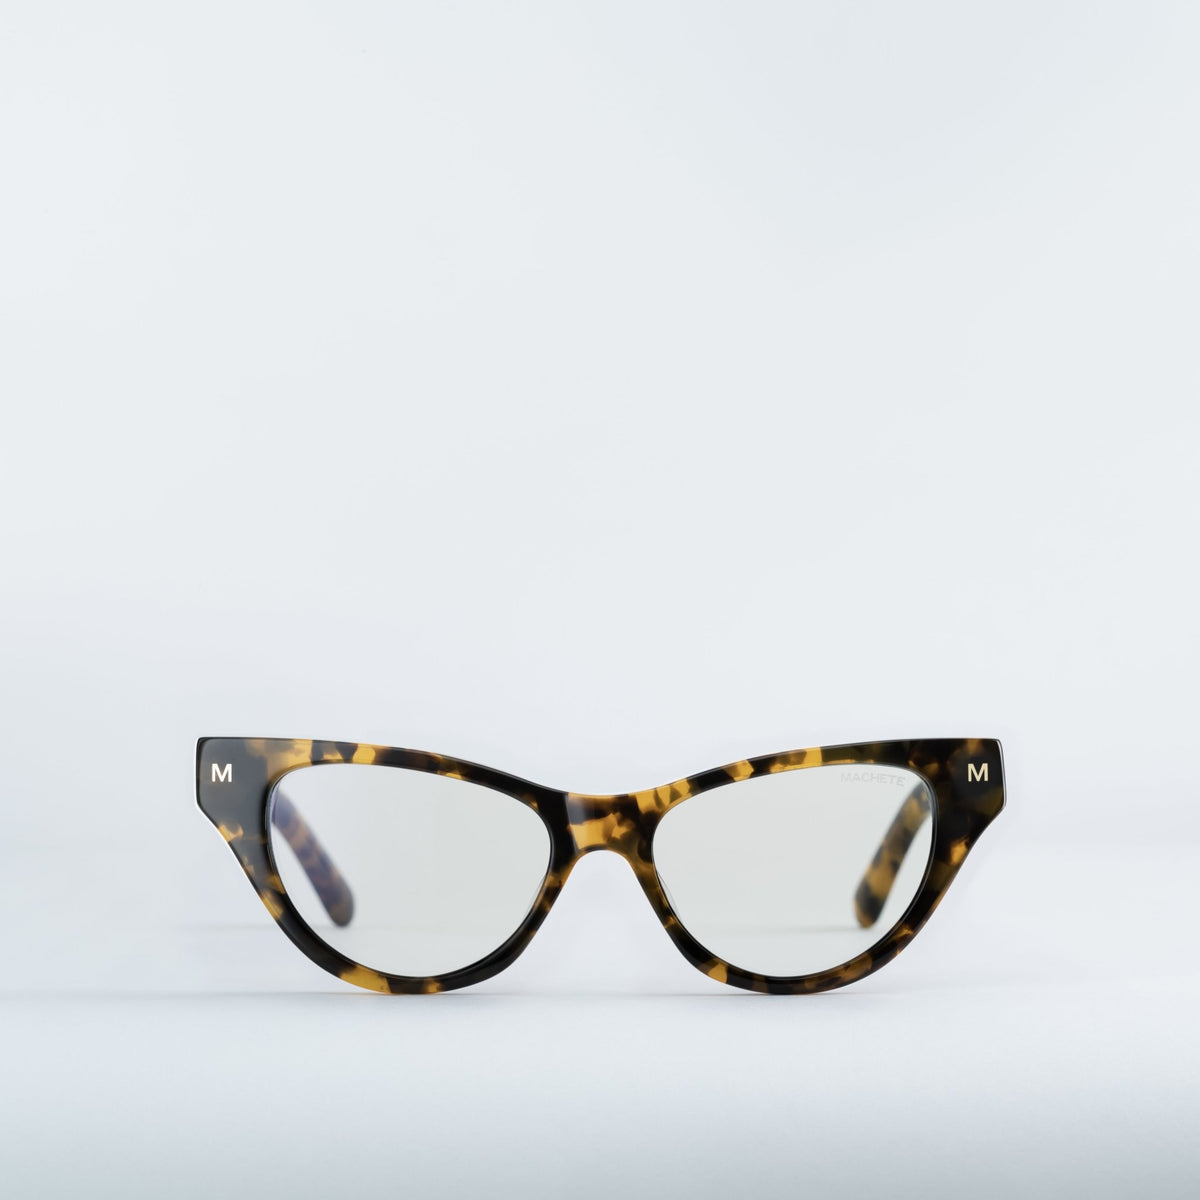 Suzy Blue Light Filtering Glasses in Classic Tortoise